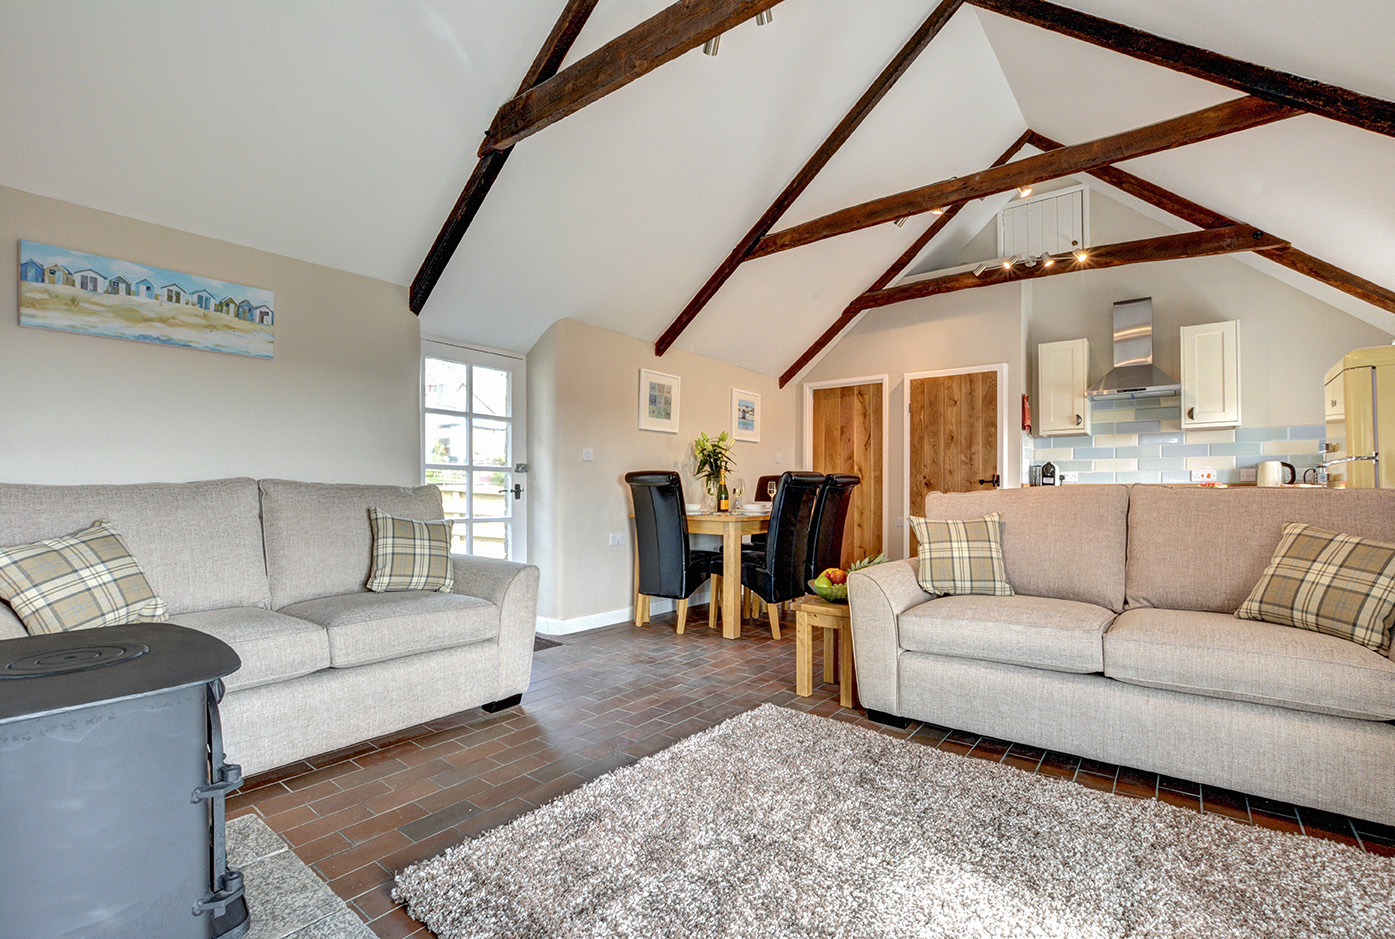 The lounge and dining area of Otterbridge luxury self catering converted barn holiday cottage at Penrose Burden in North Cornwall.jpg